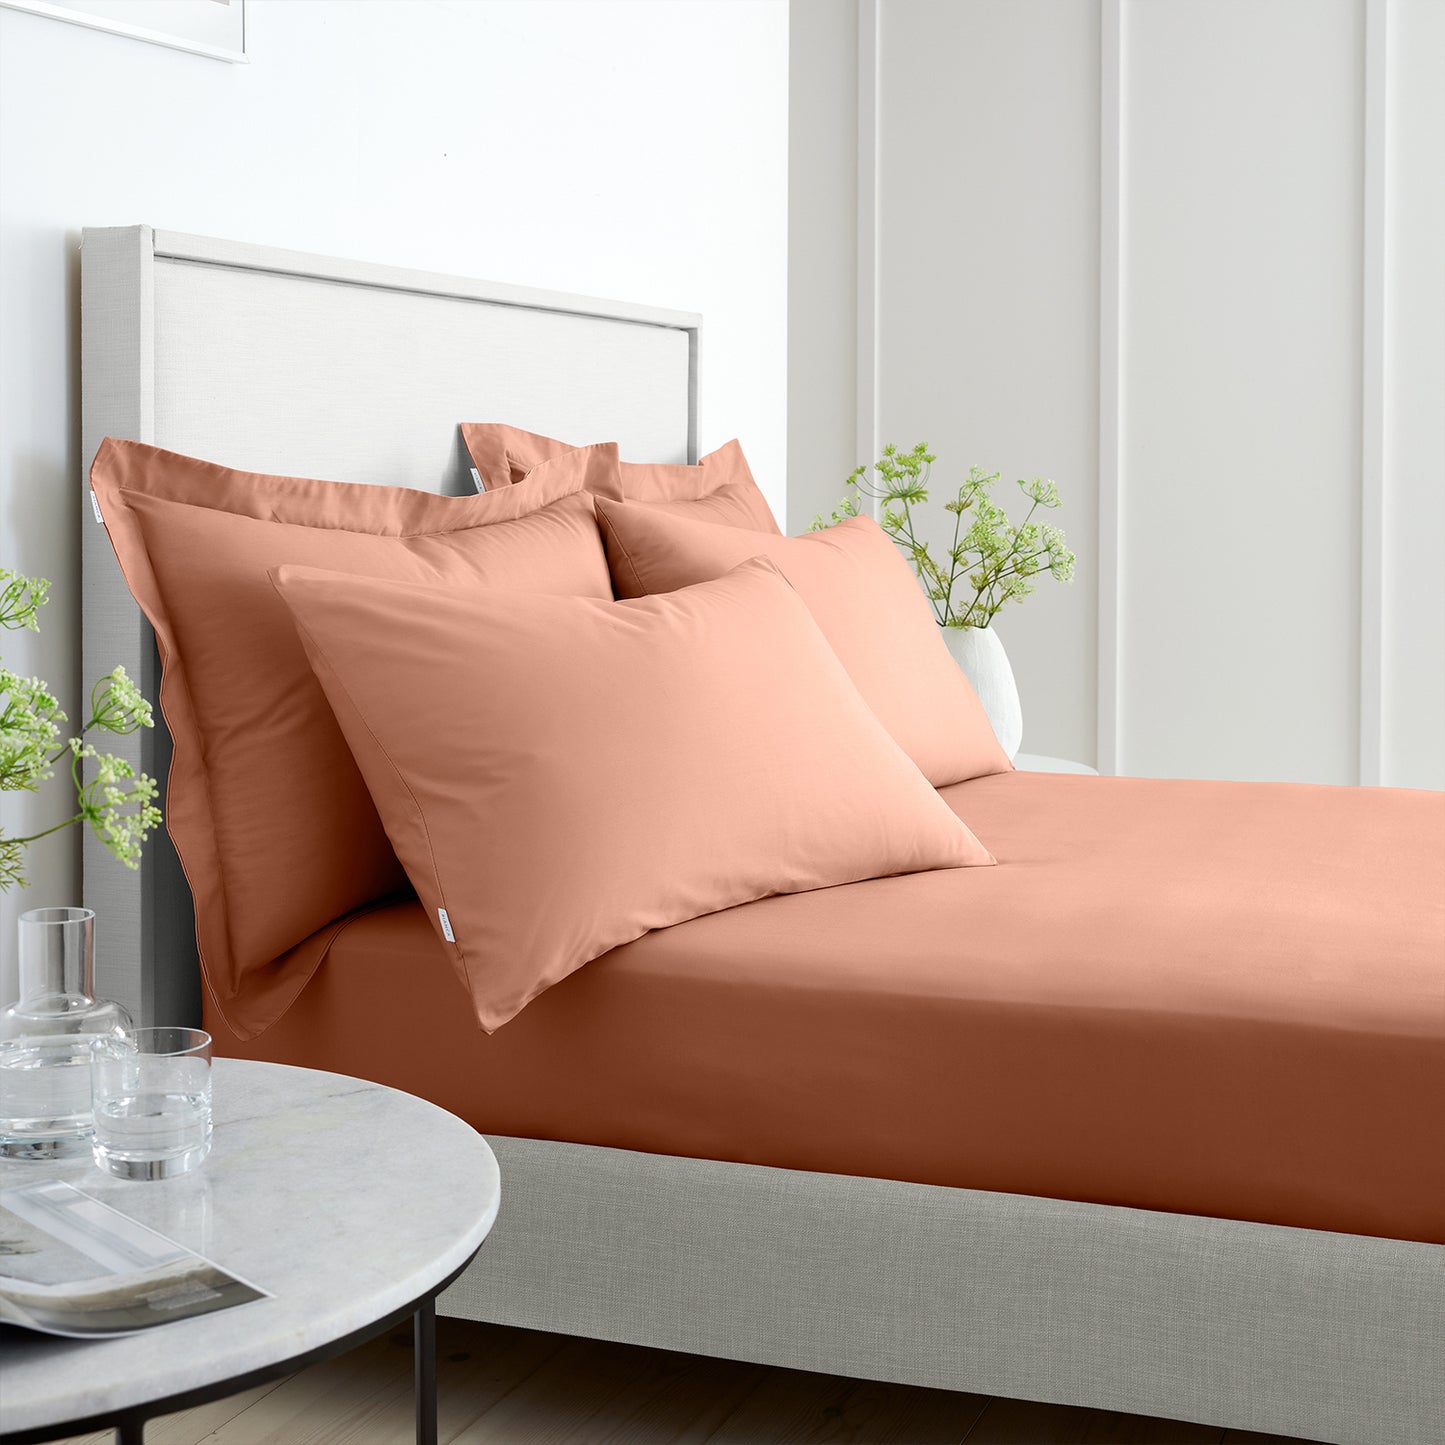 Bianca Clay 200TC Cotton Percale Fitted Sheet